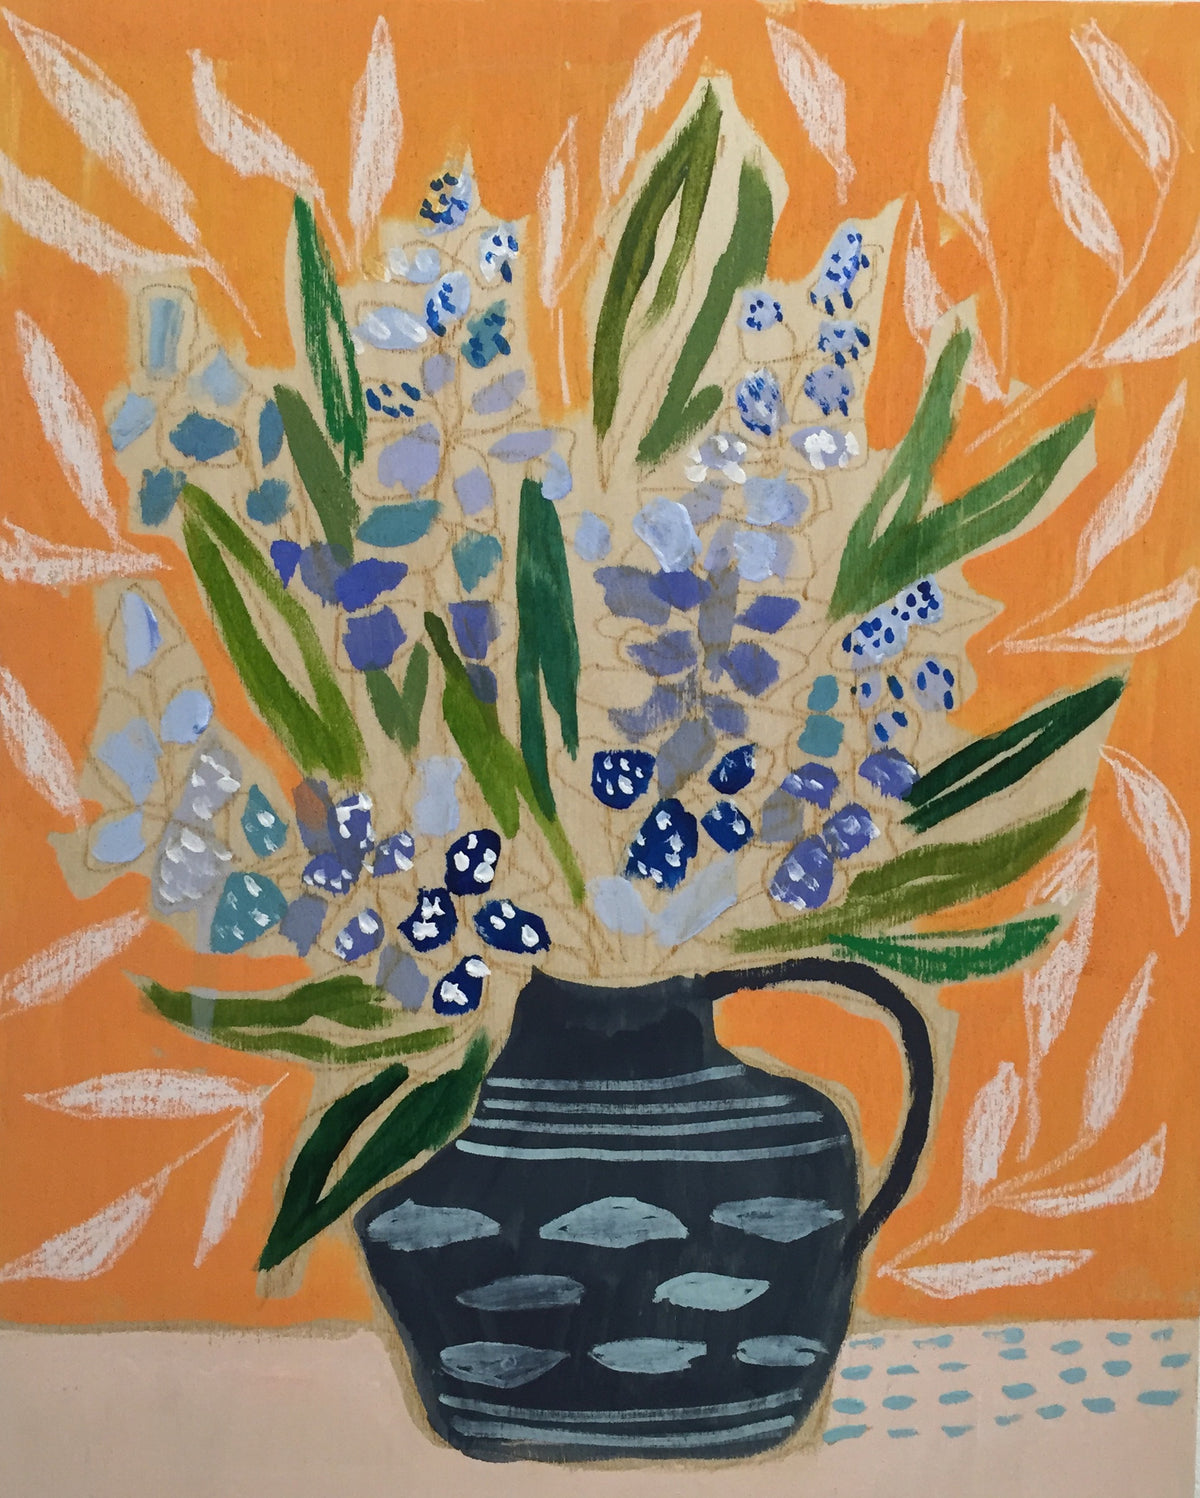 STATE FLOWER OF TEXAS - FLOWERS FOR KATHRYN - 11x14